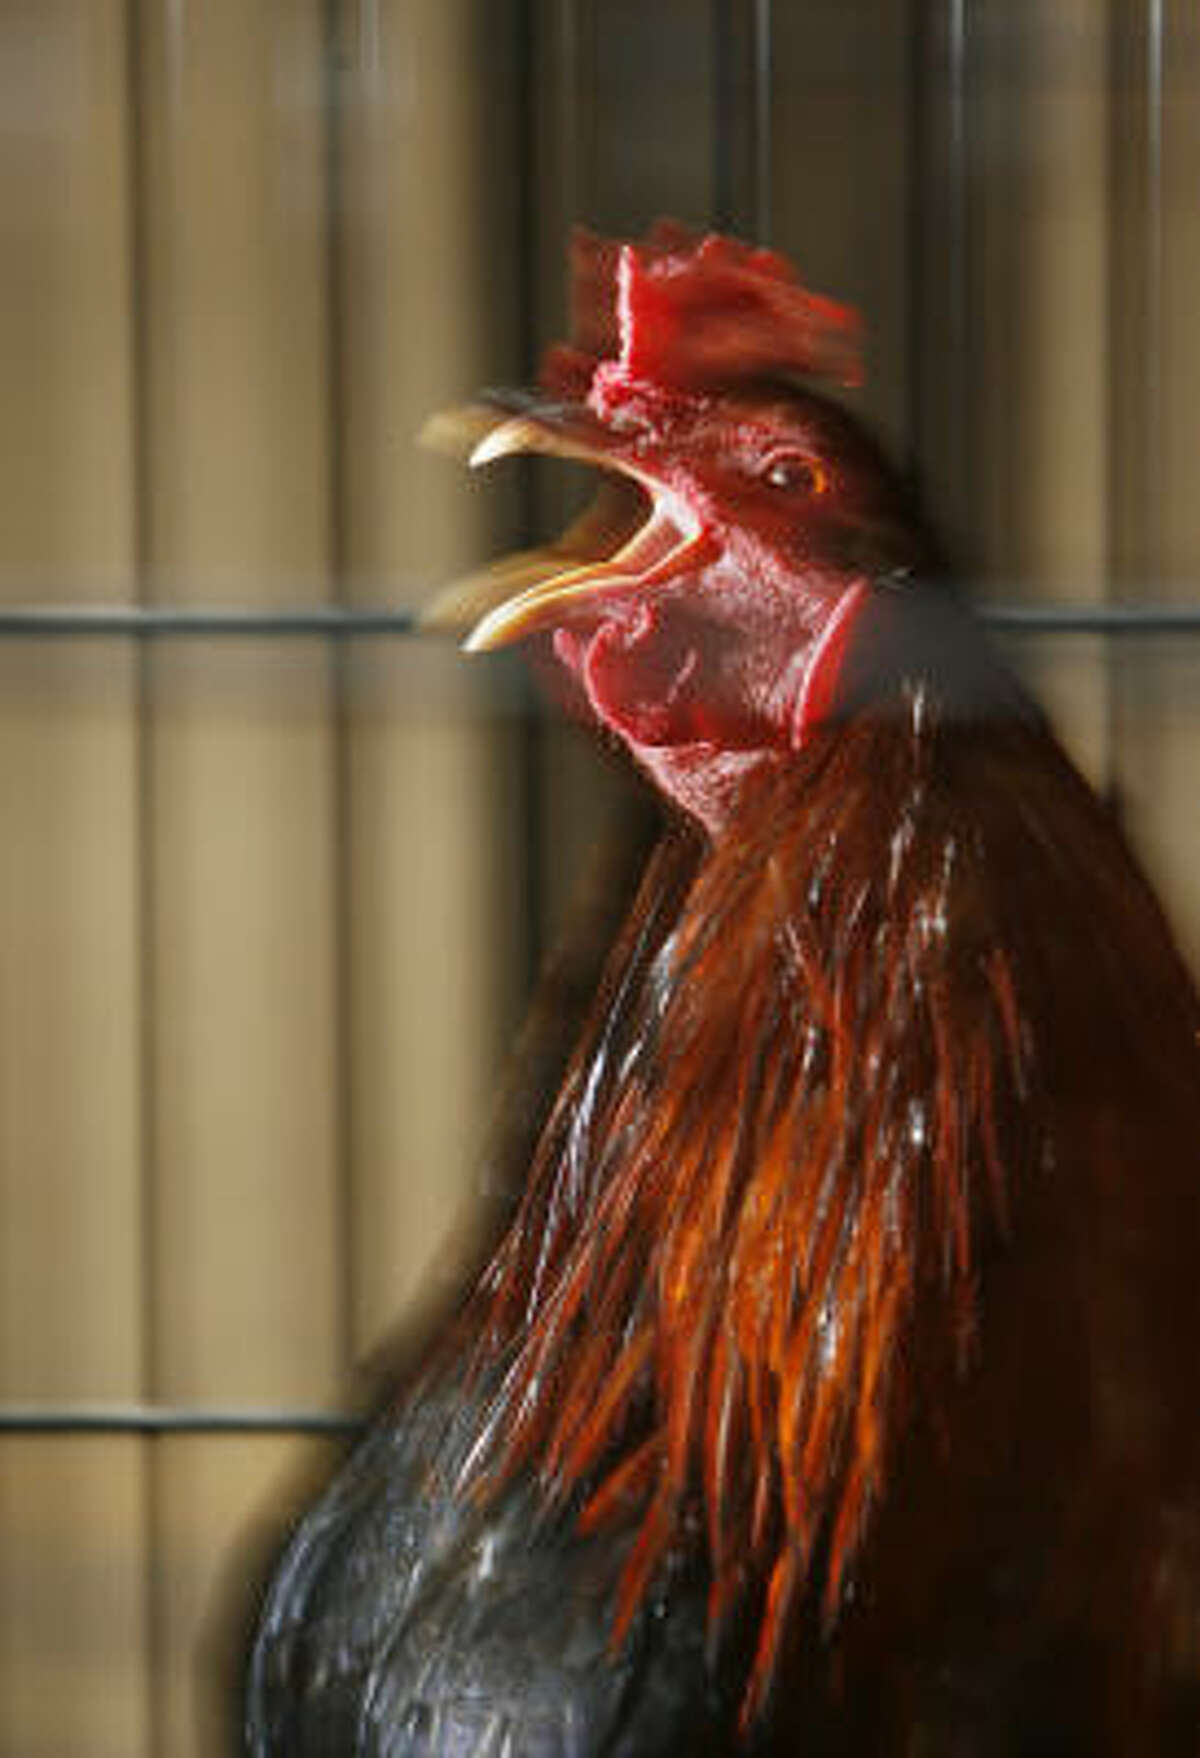 Houston's Society for the Prevention of Cruelty to Animals is handling 400 fighting roosters seized in November.